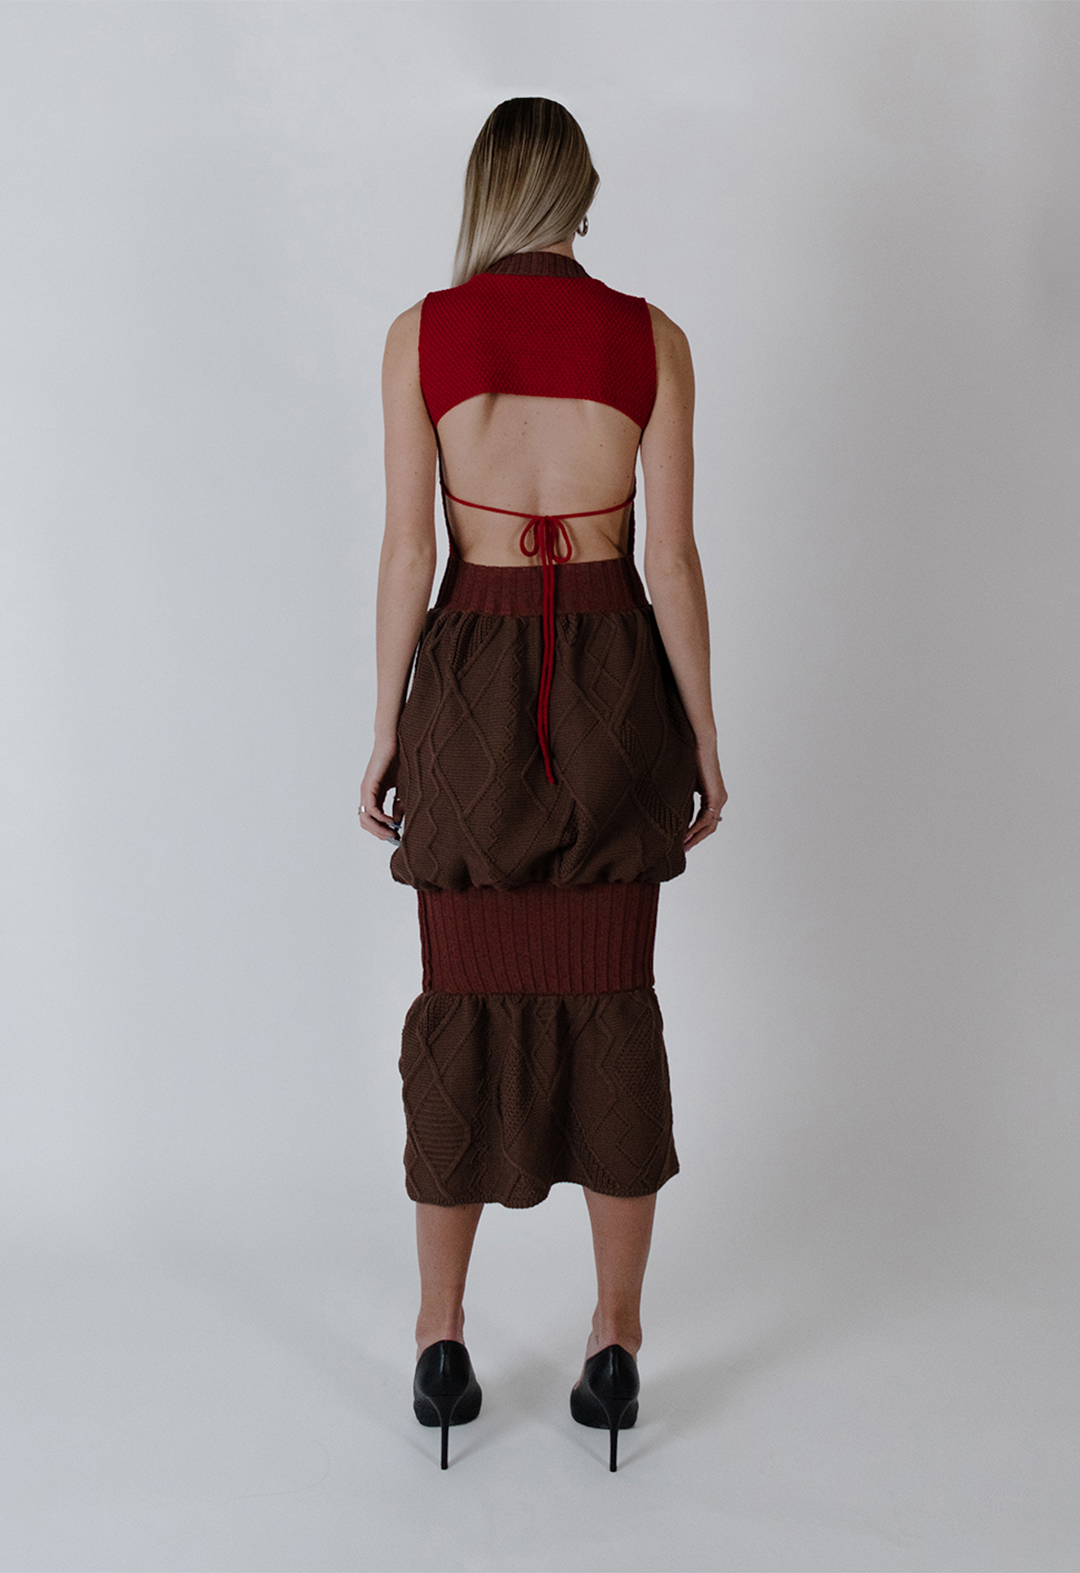 This is a photo of the back of the dress, with an open-back design. The top of the dress is open back, showing the lower back. There is a bow detail in the middle of the model's back. The bottom of the skirt has the same details as the front. Irregular Aran stitches fill the skirt with a balloon shape, creating an exaggeration of the hips. 